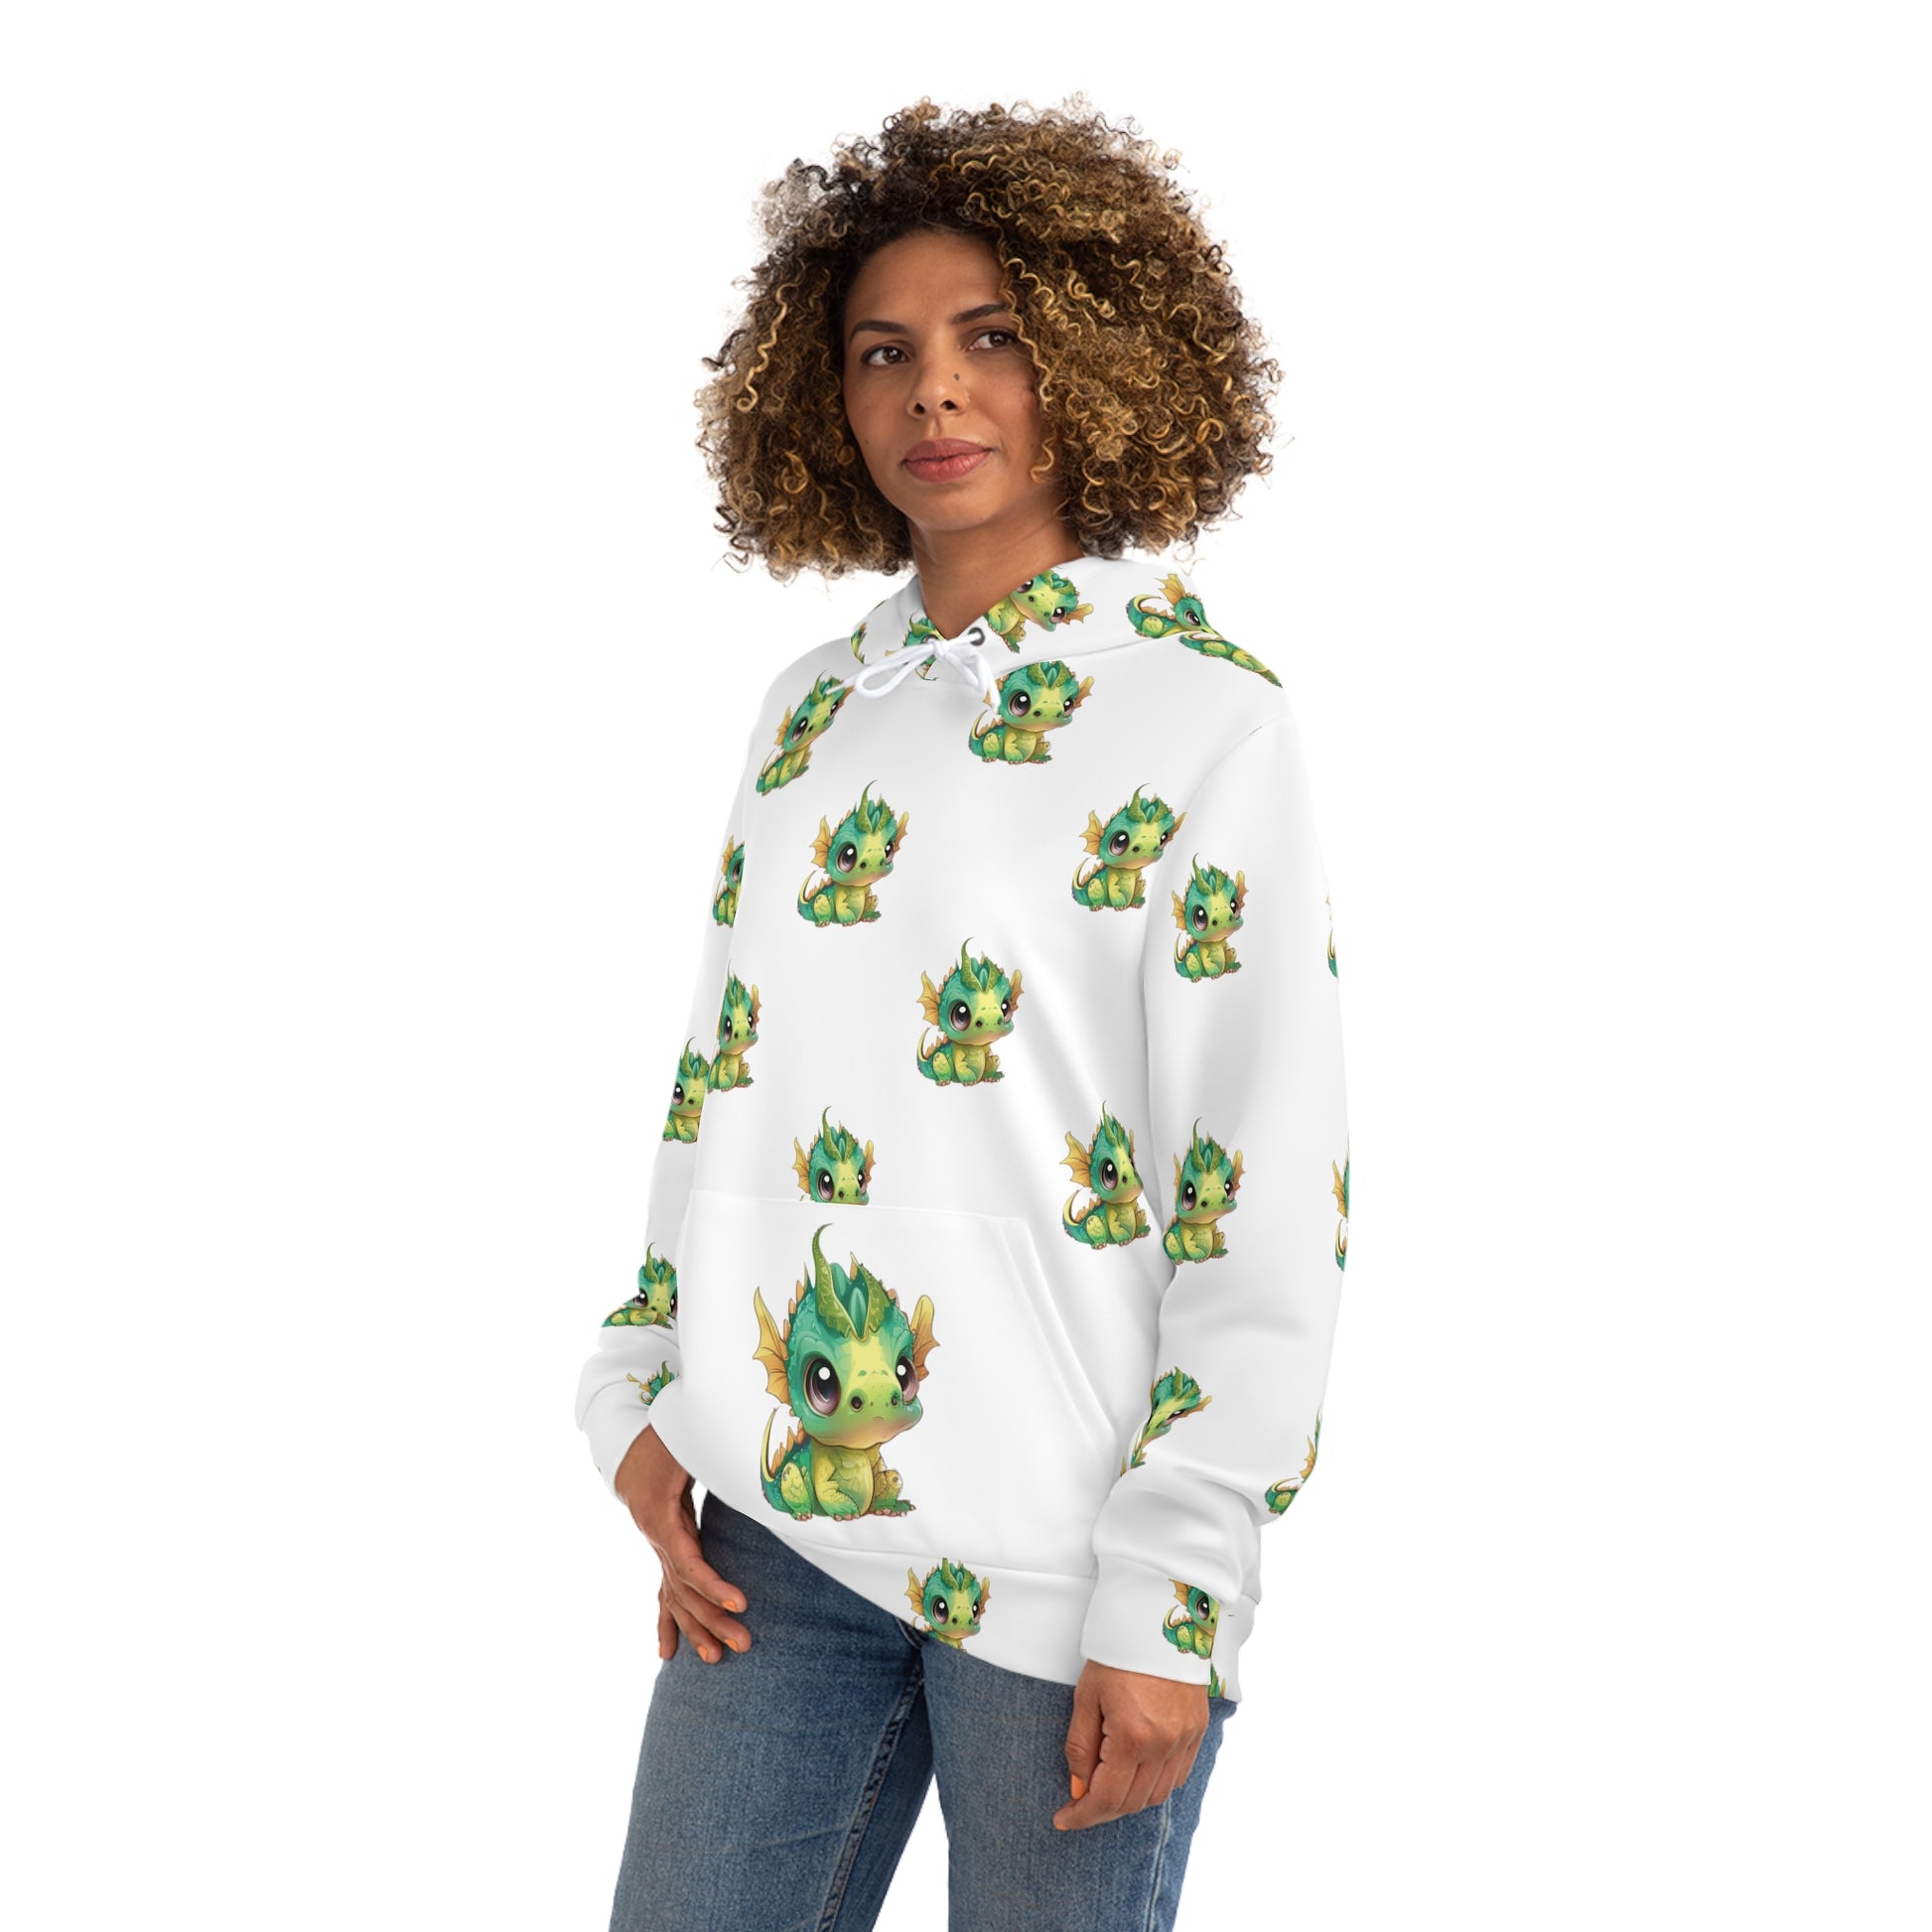 On a hoodie with a large front pocke sits a cute baby Bobby Dragon in greens yellows and a green baby horn - he is all over the hoody about 3 inches tall and 3 inches away from each other on this all over print hoody.